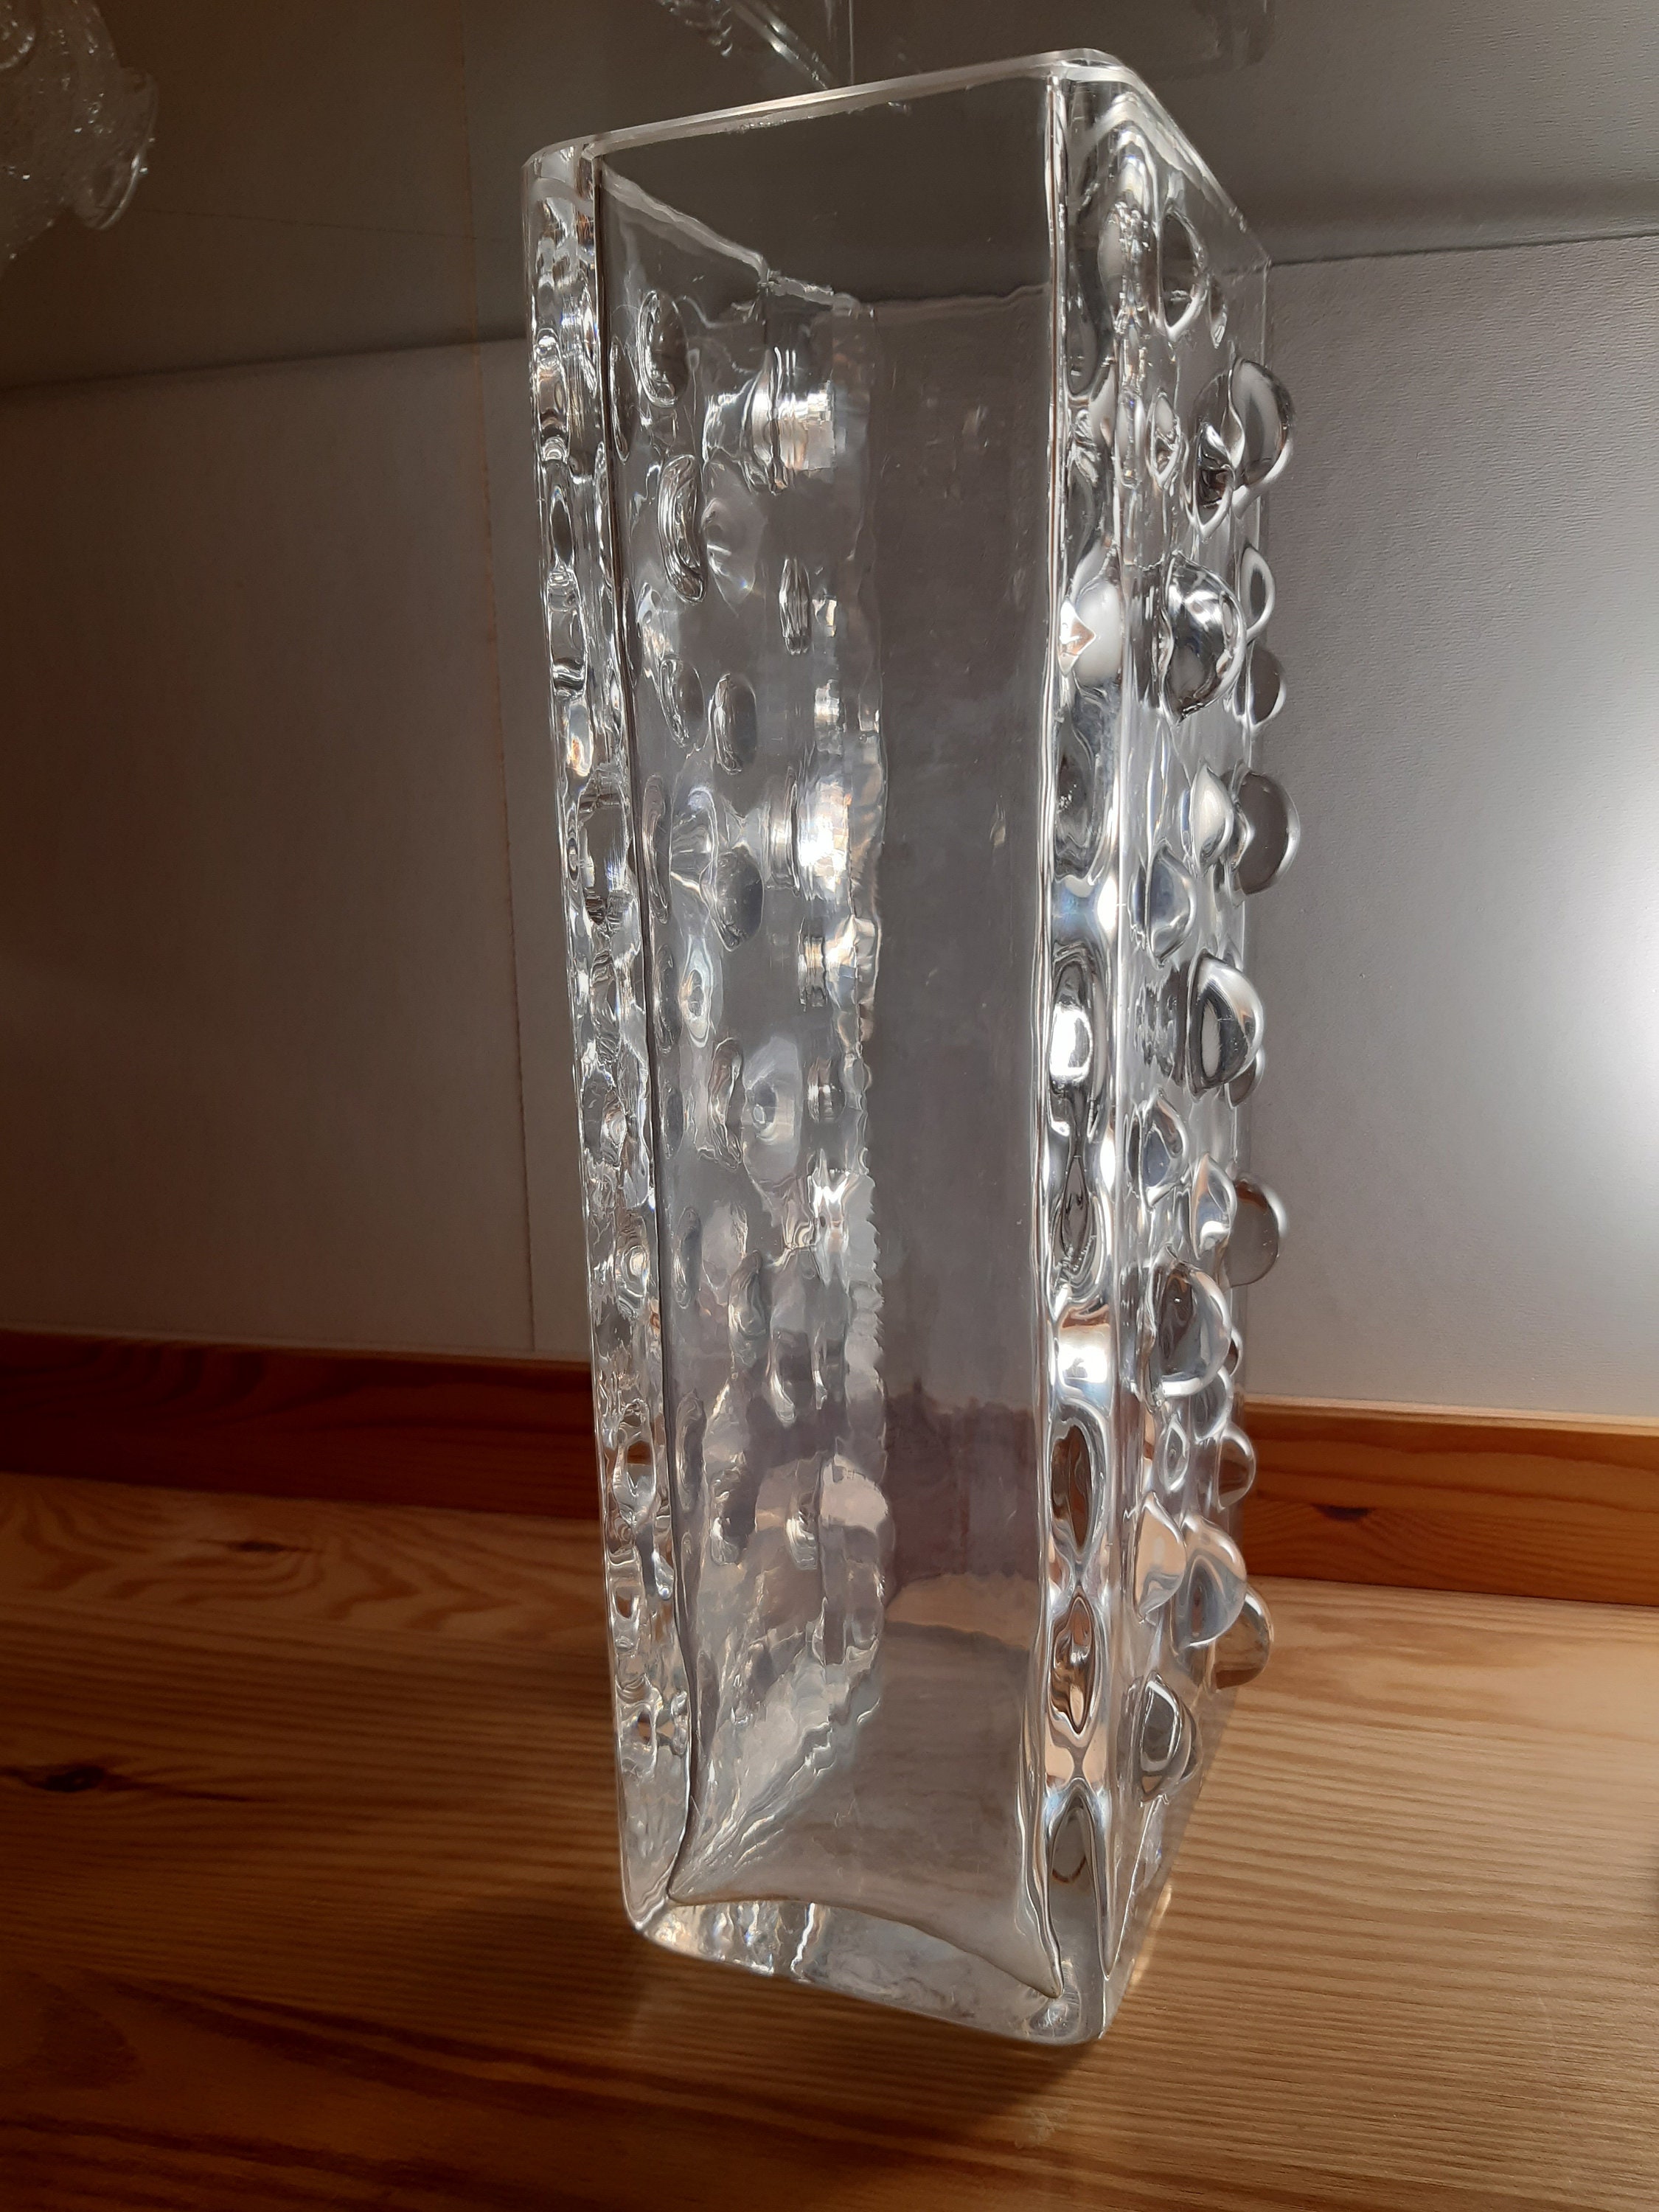 Rectangular Bubble Glass Vase by WMF Glas in Clear Color, circa